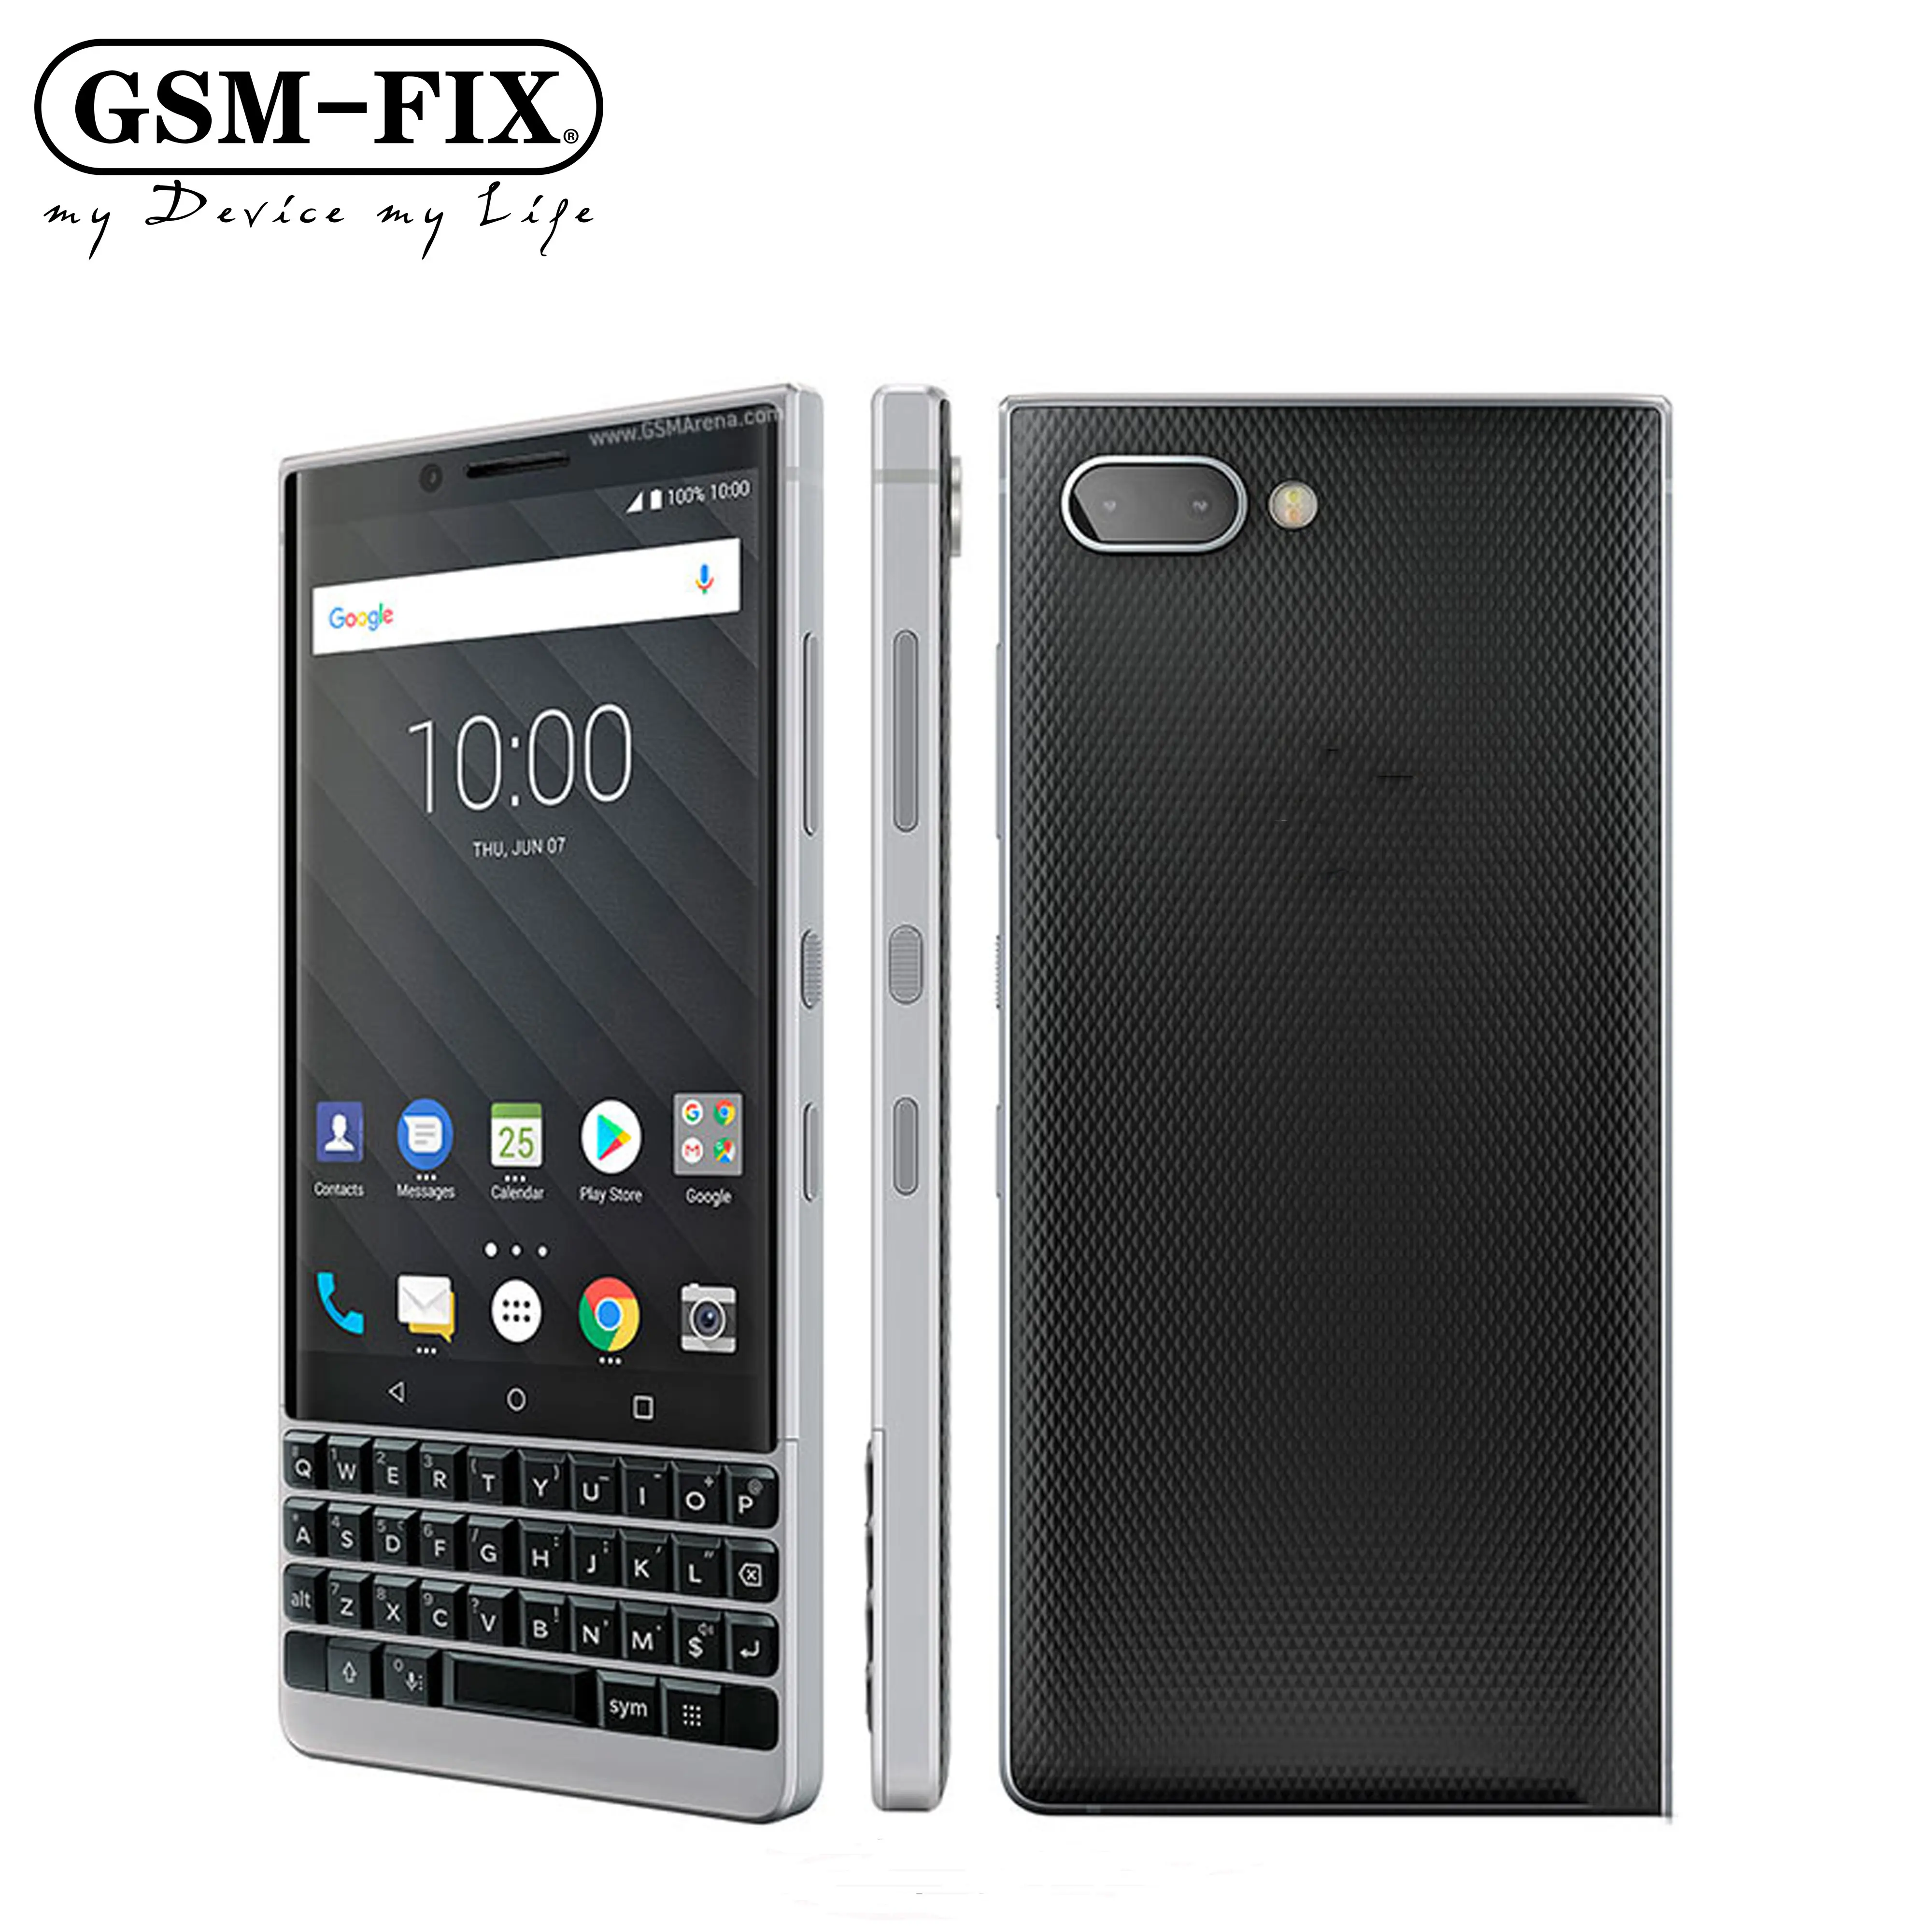 GSM-FIX Original Unlocked GSM Full Keyboard QWERTY Touchscreen Mobile CellPhone Android Smartphone For BlackBerry Keytwo